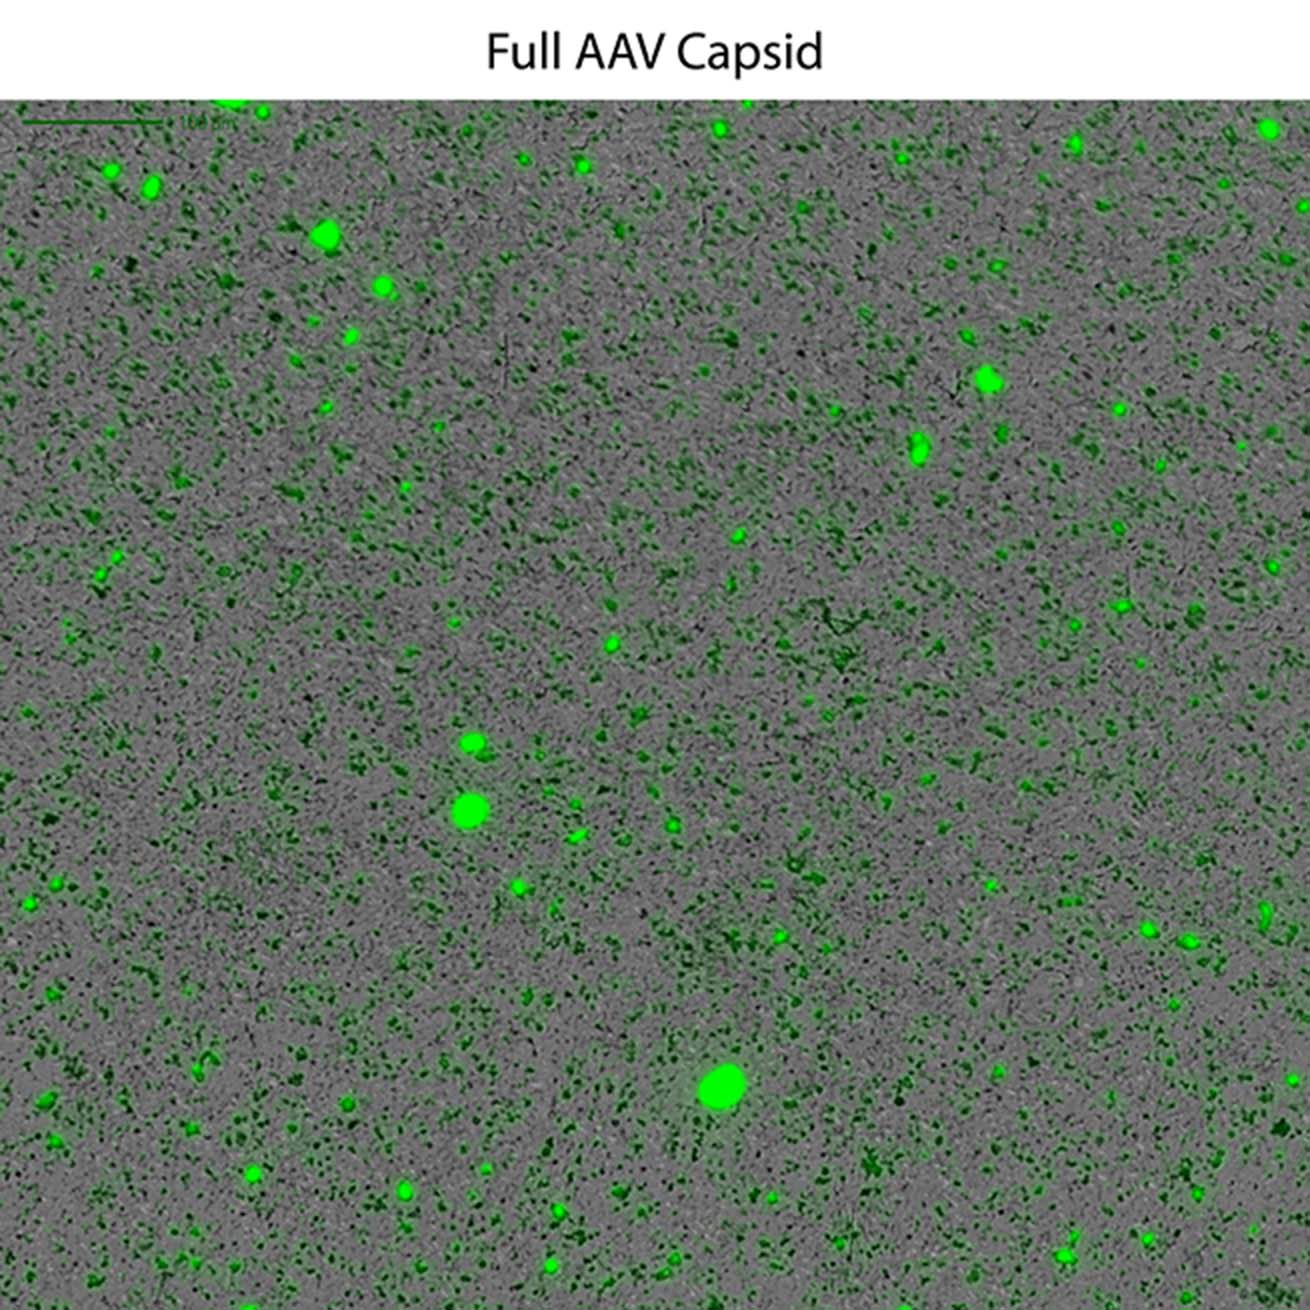 Full AAV capsids are rapidly visualized with fluorescent DNA using the Aura platofrm.